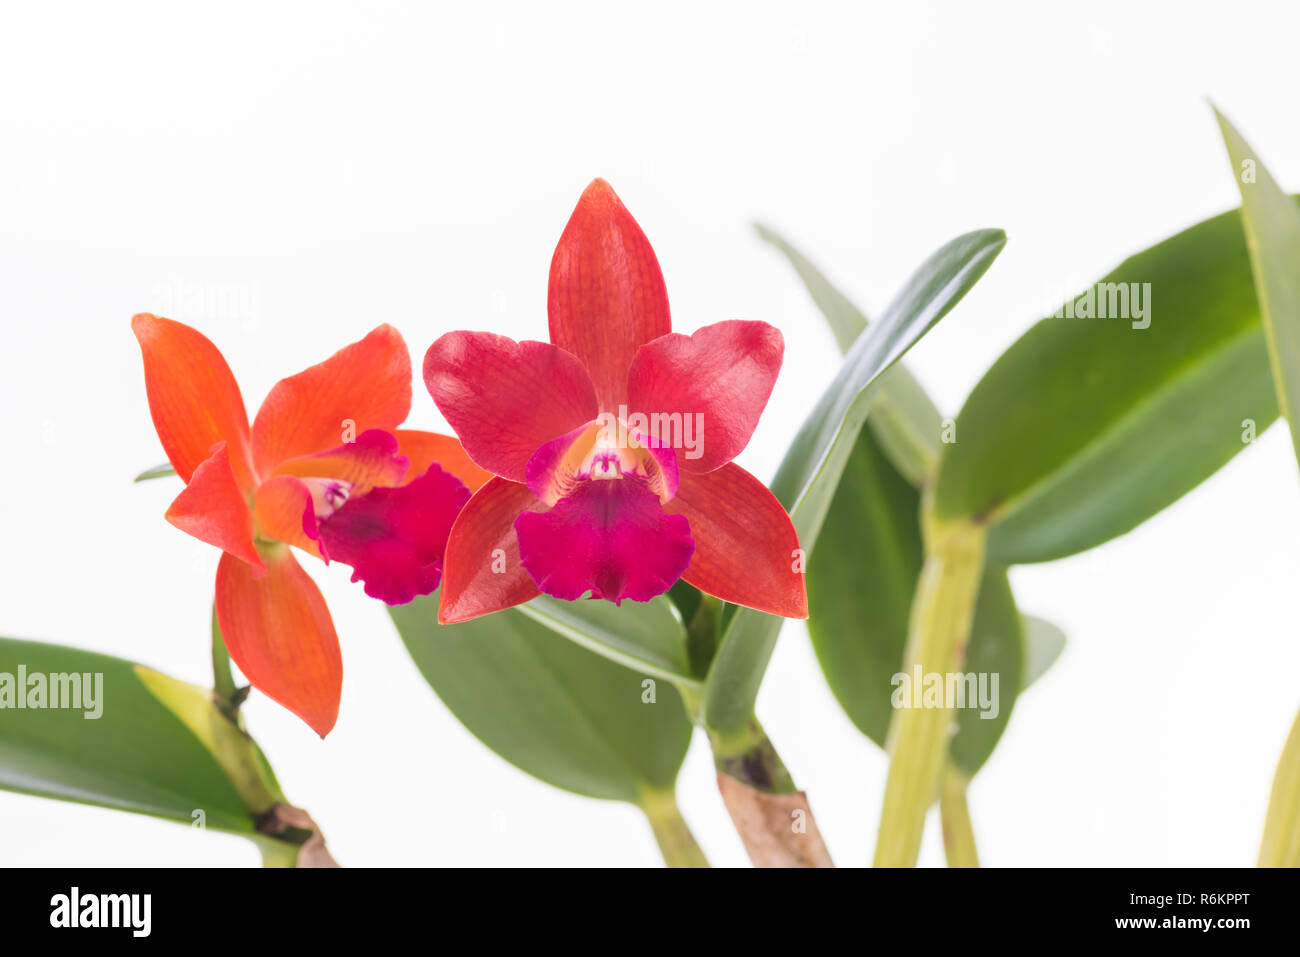 Cattleya orchids over white background Stock Photo